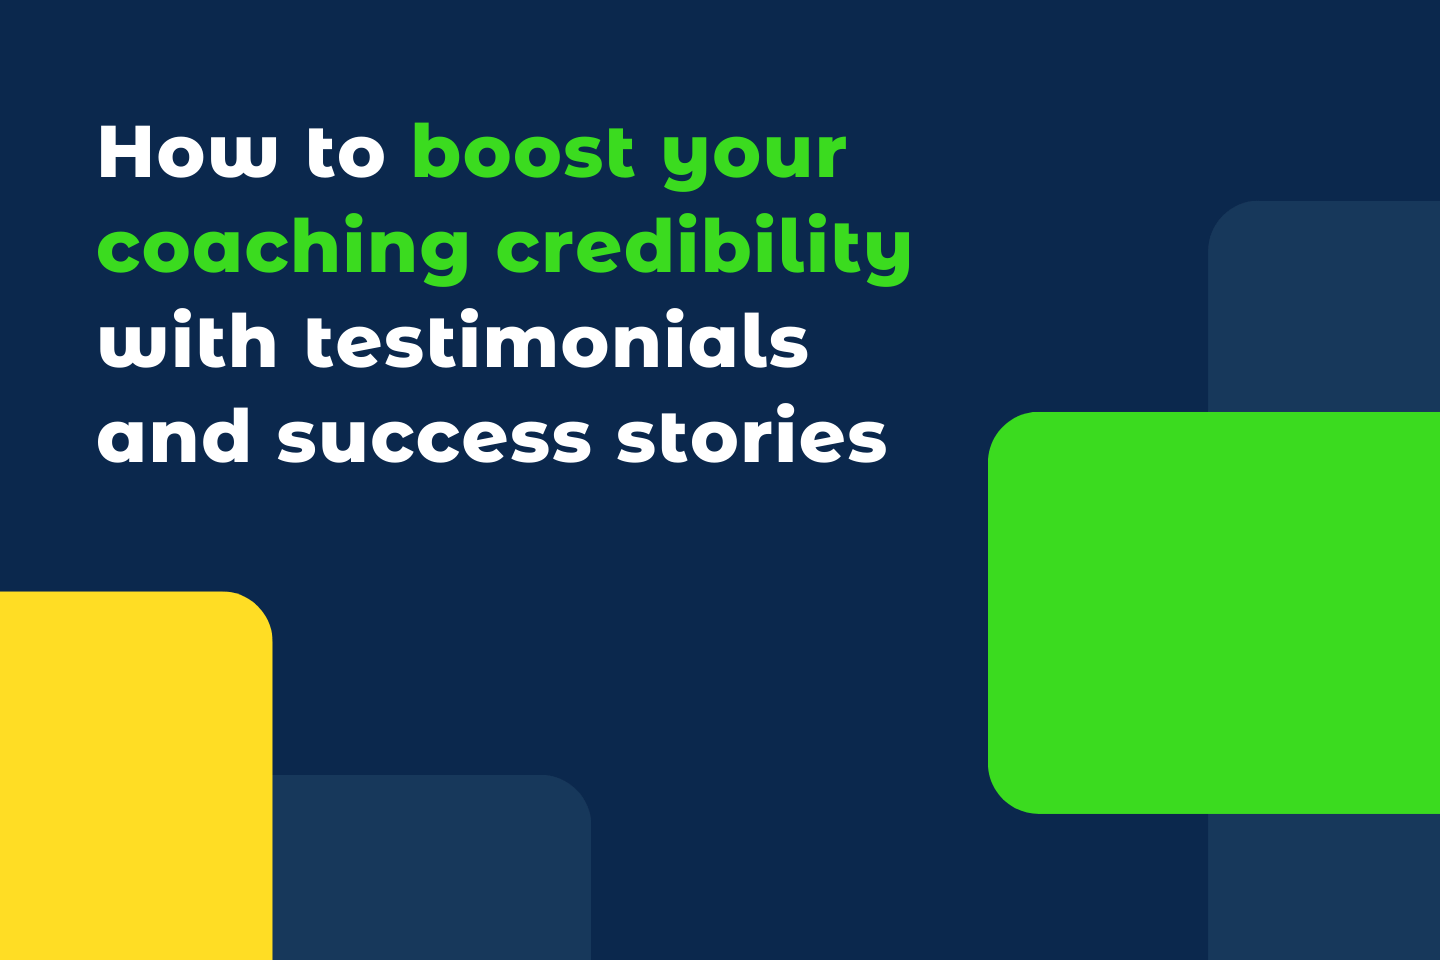 How to boost your coaching credibility with testimonials and success stories